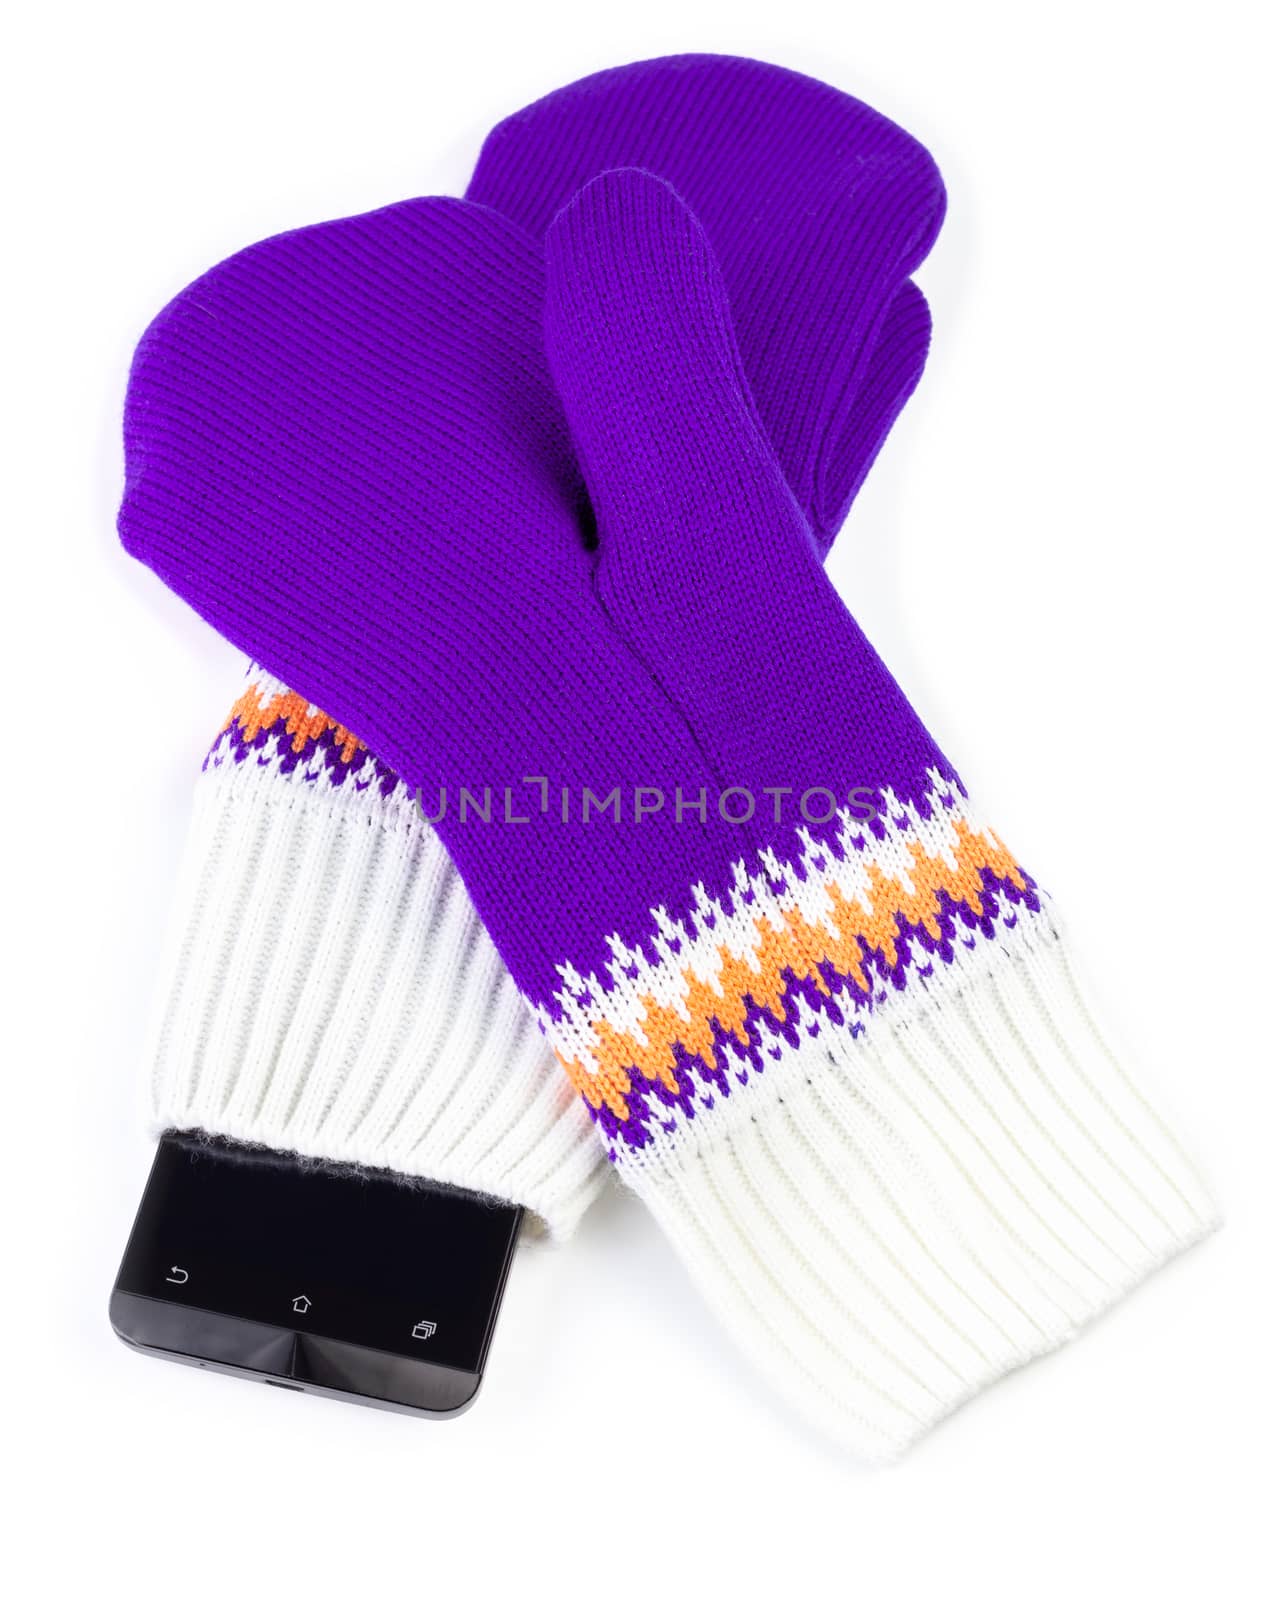 purple and white knited mittens with cellphone isolated on white background by z1b